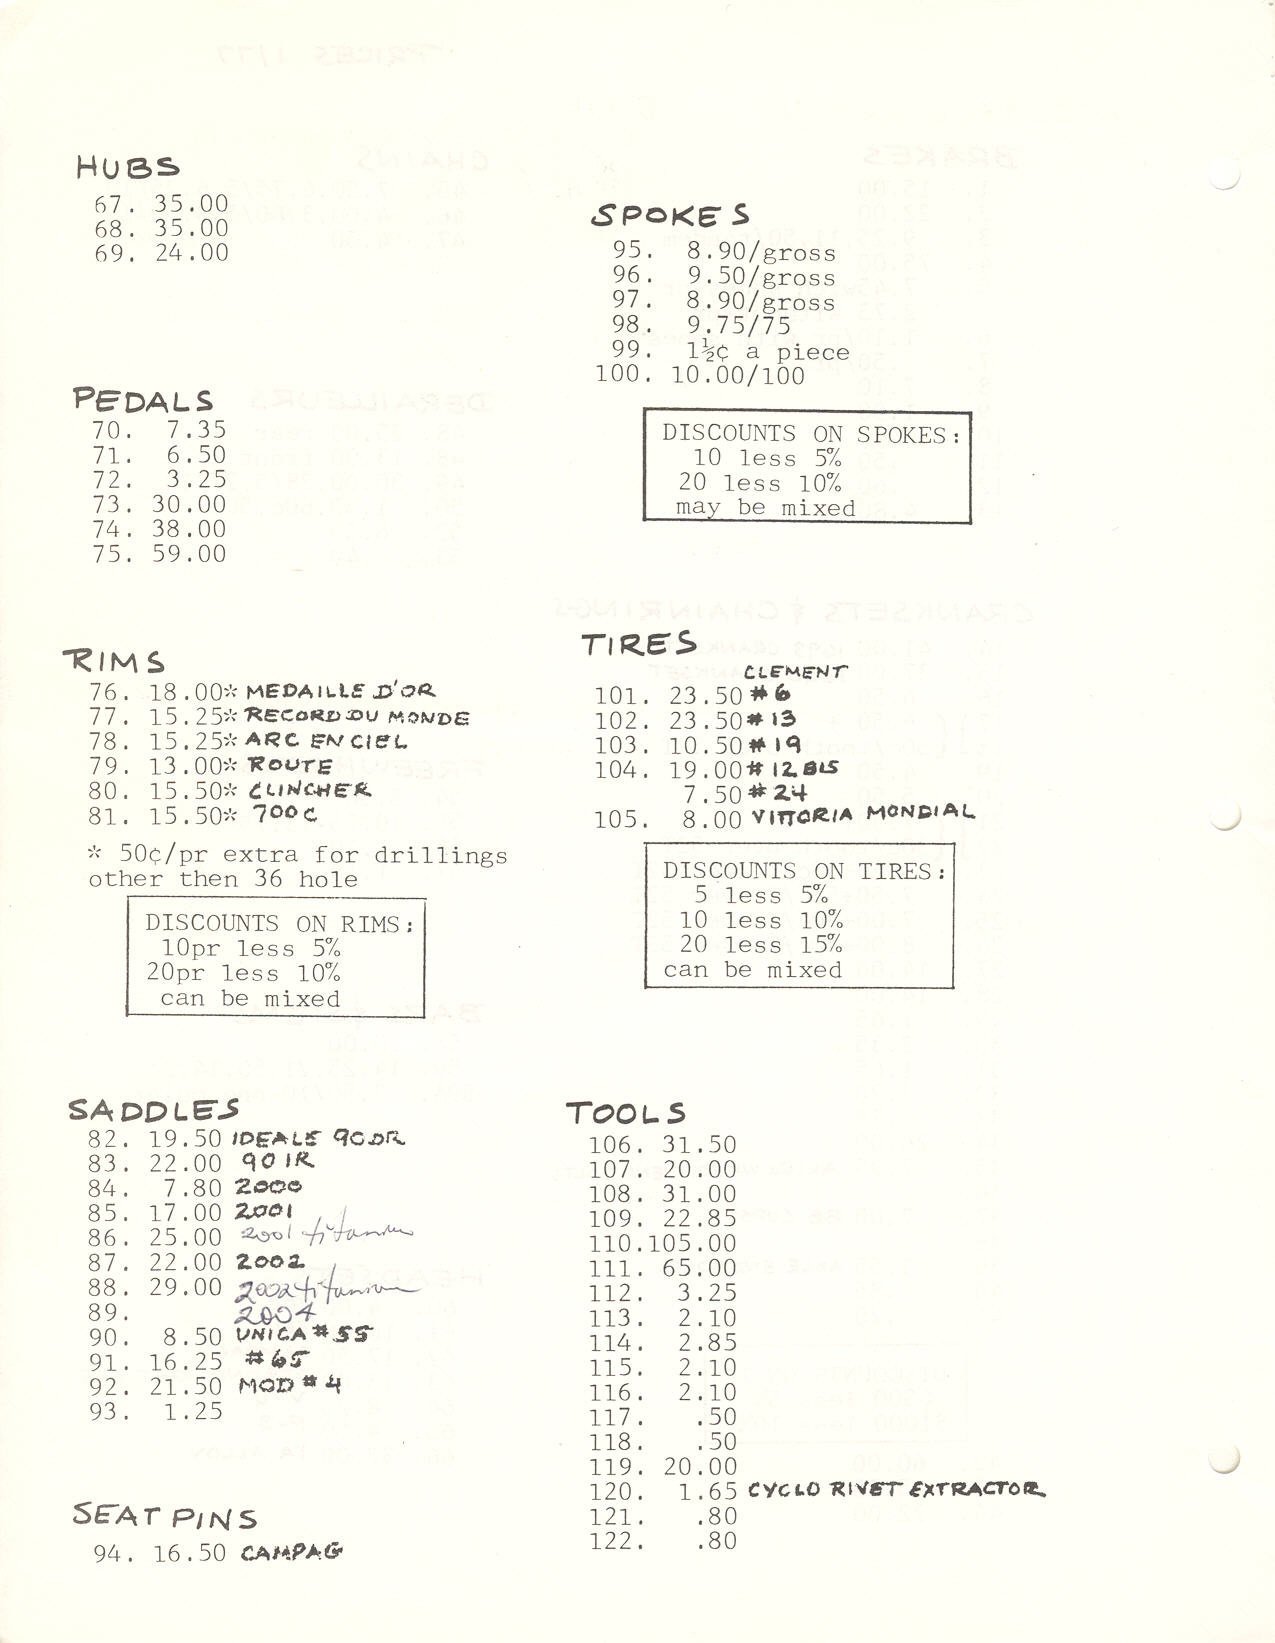 Cycle Imports catalog (1977) - Page 010